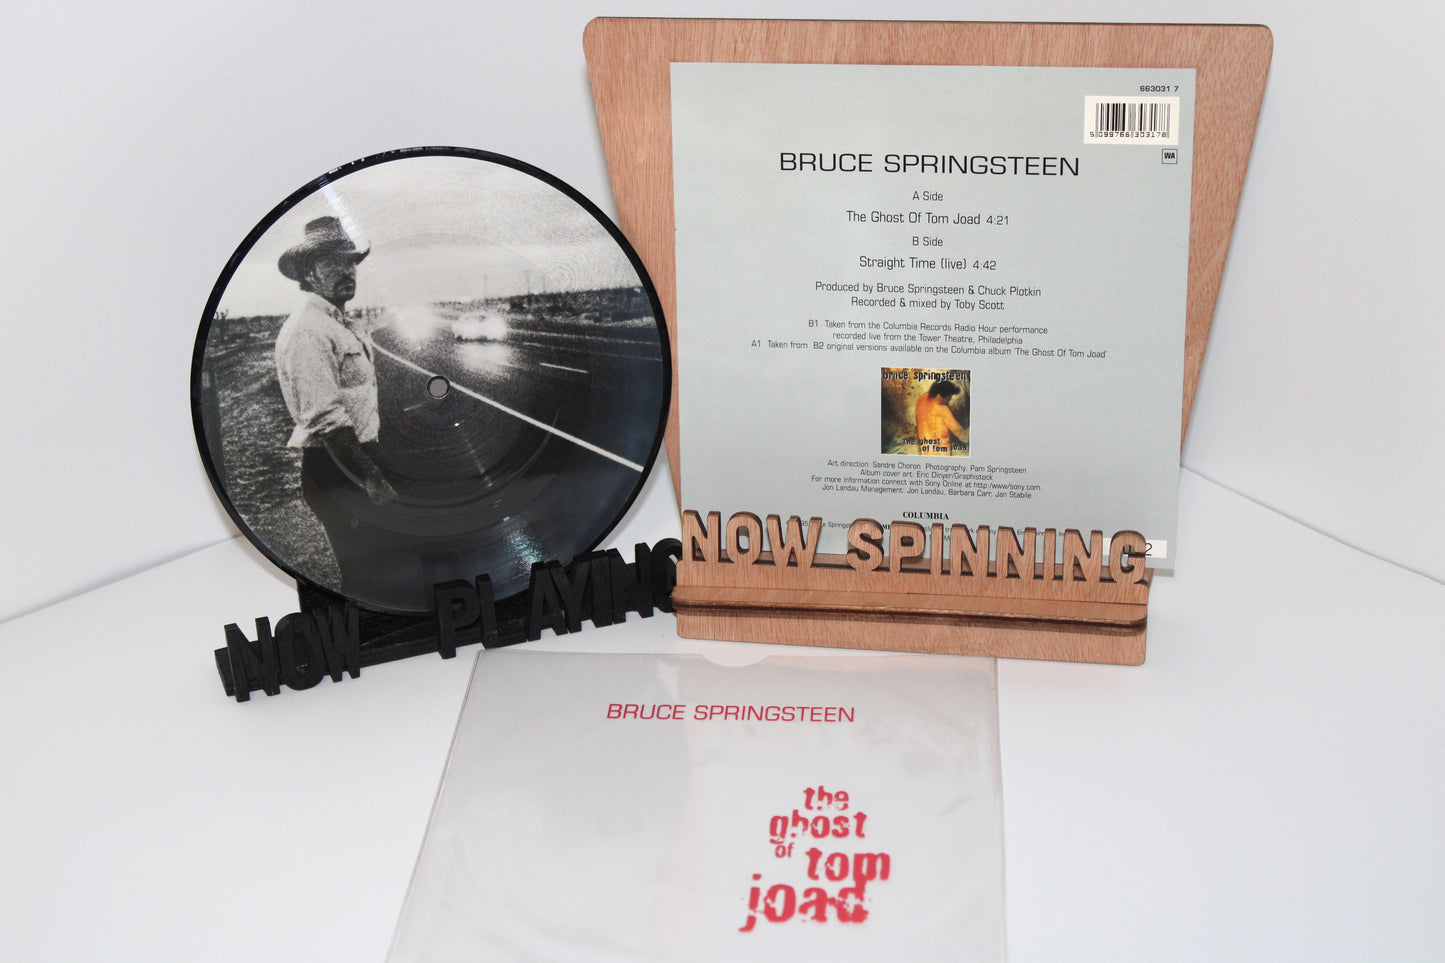 Bruce Springsteen 7" Picture Disc Vinyl Collectible Ltd. Ed. & Number 0012 - Ghost of Tom Joad